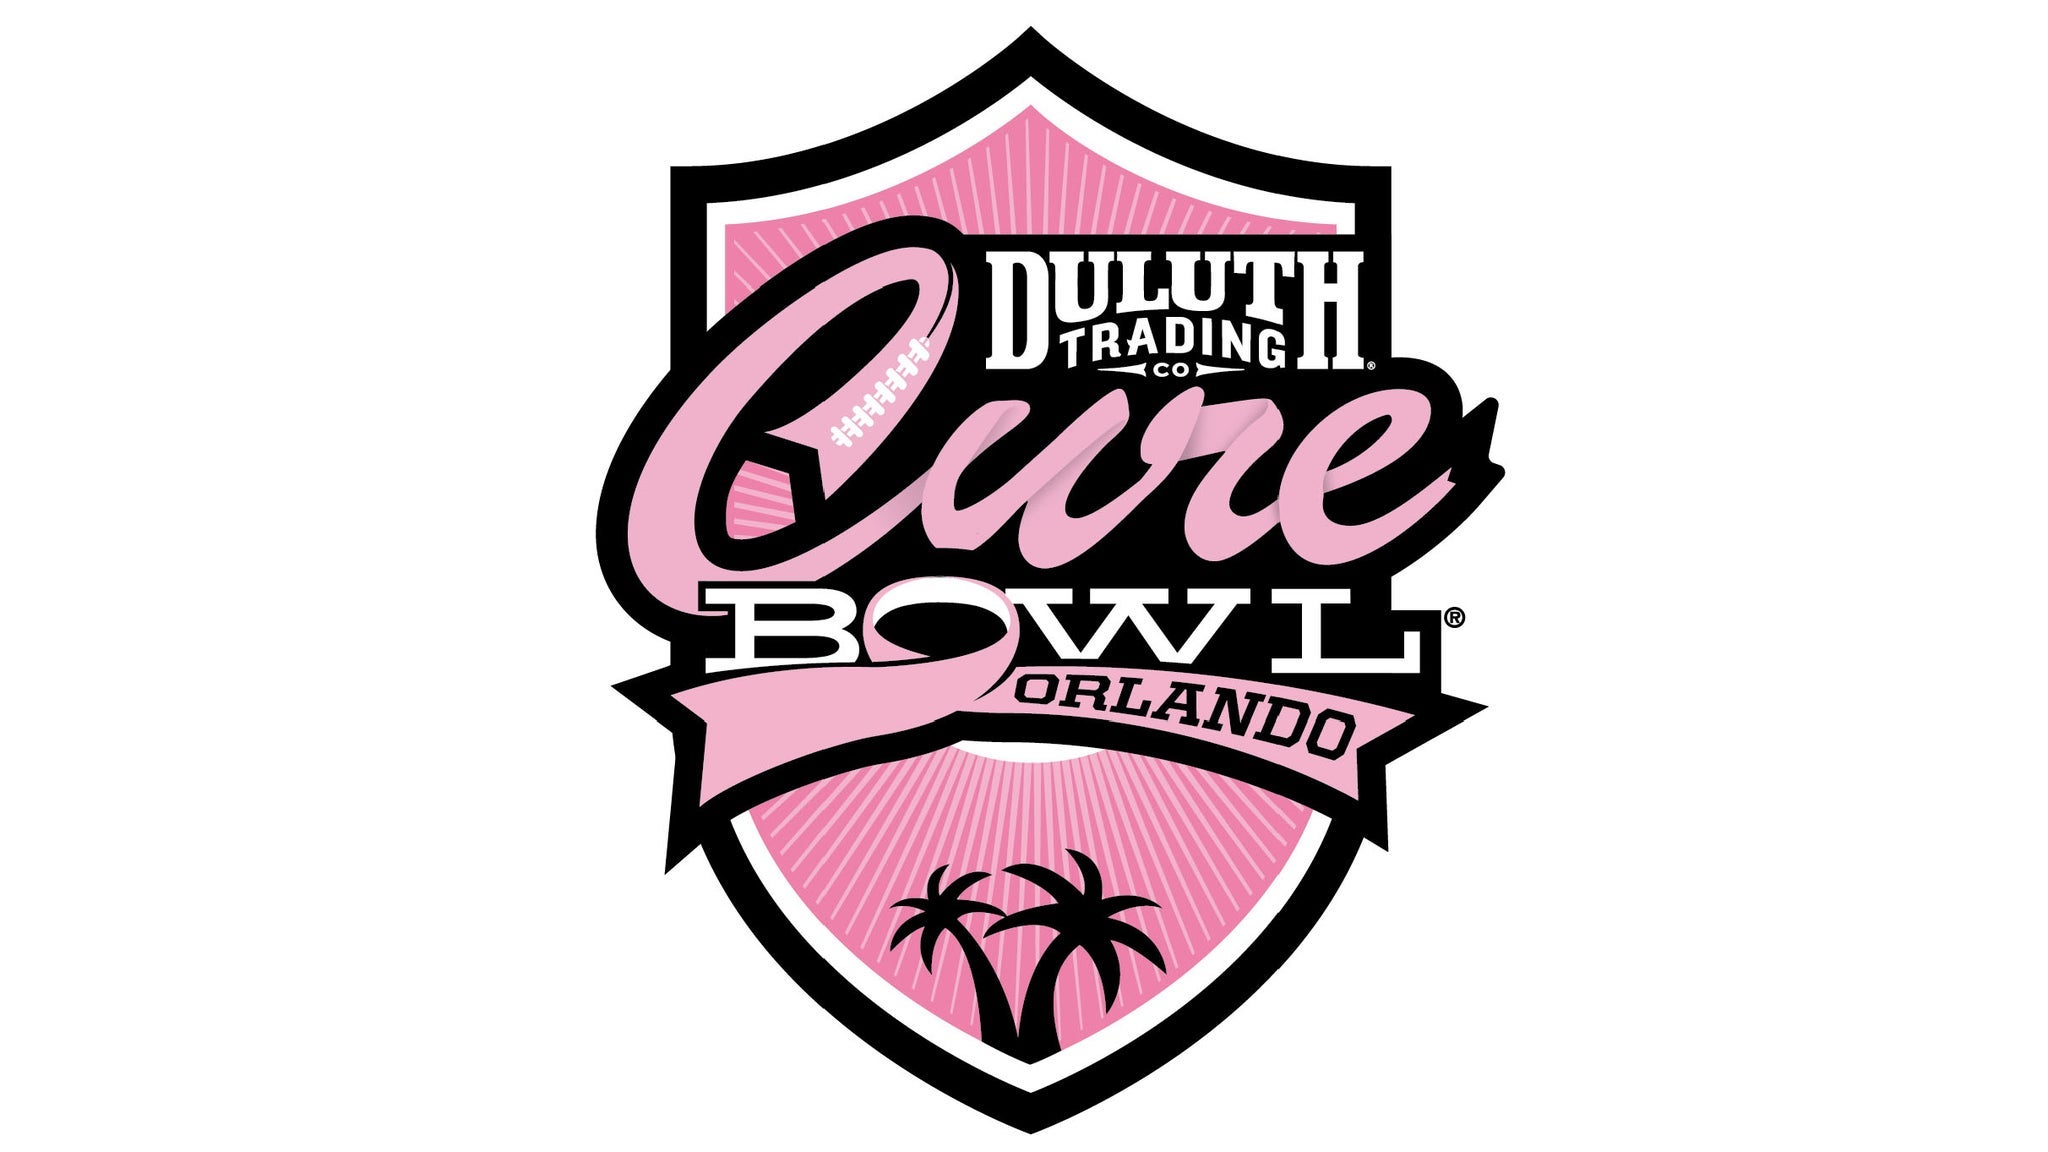 Duluth Trading Cure Bowl pre-sale password for show tickets in Orlando, FL (Exploria Stadium)